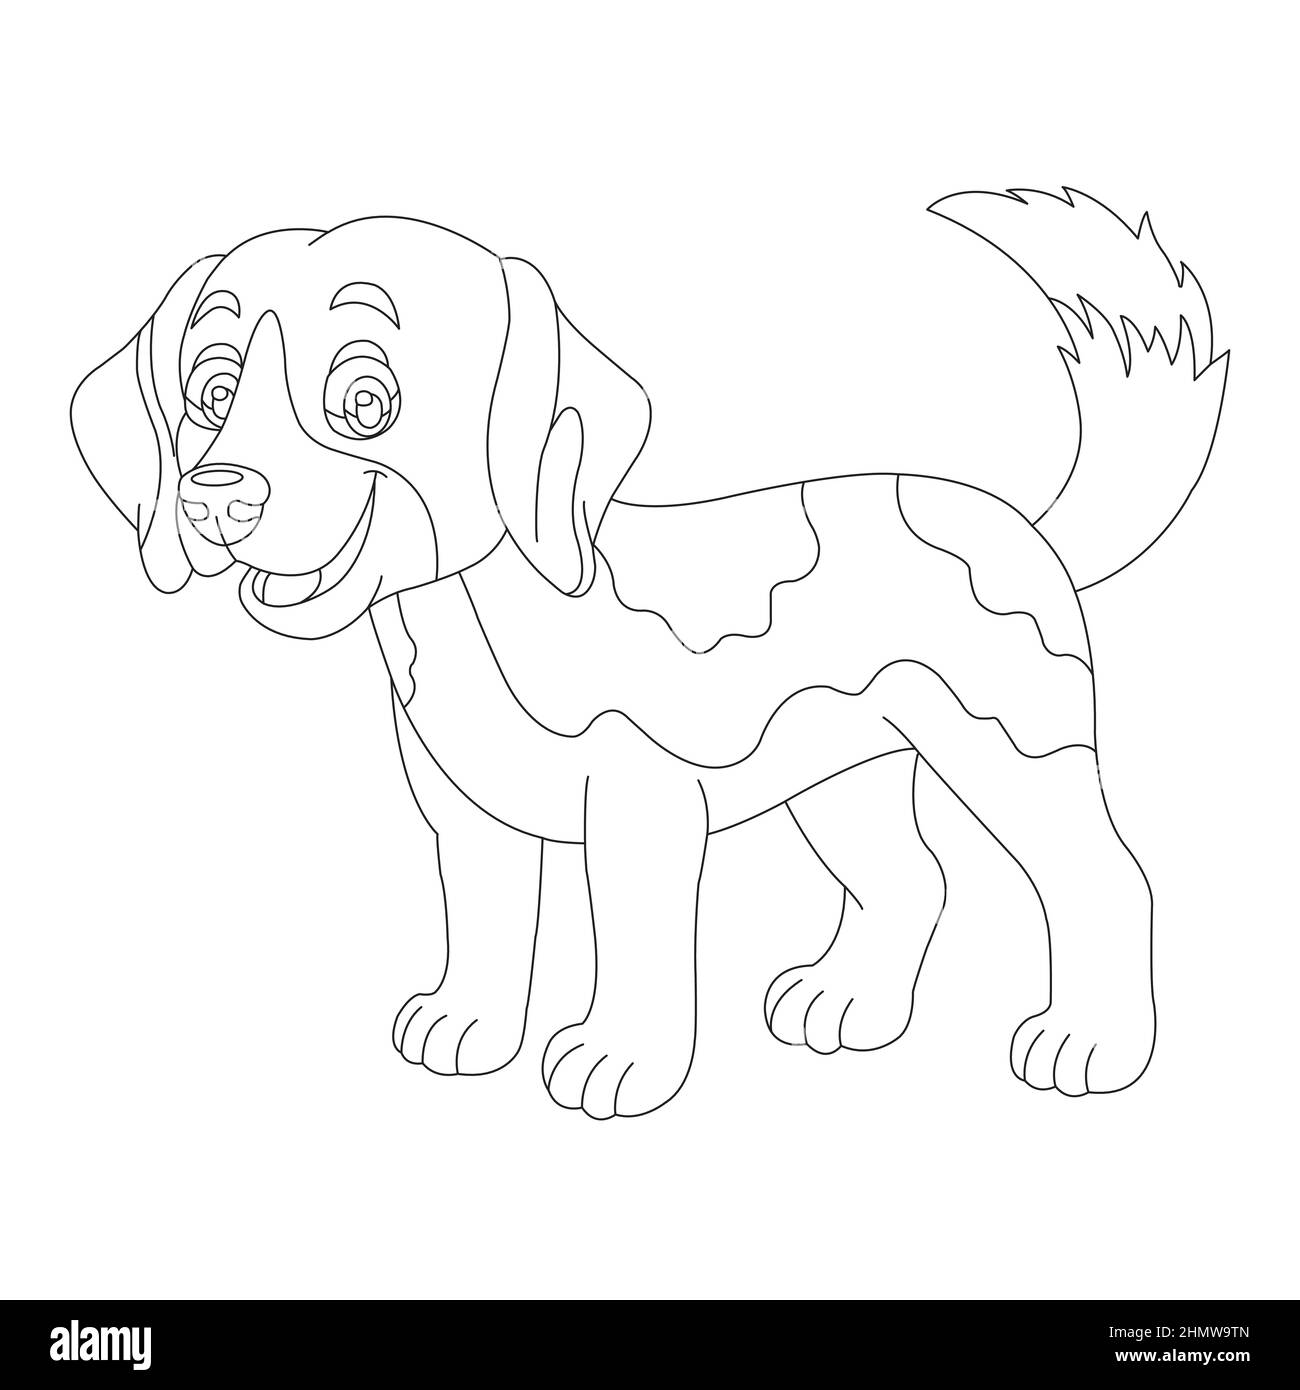 Cute puppy dog outline coloring page for kids animal coloring page cartoon vector illustration Stock Vector